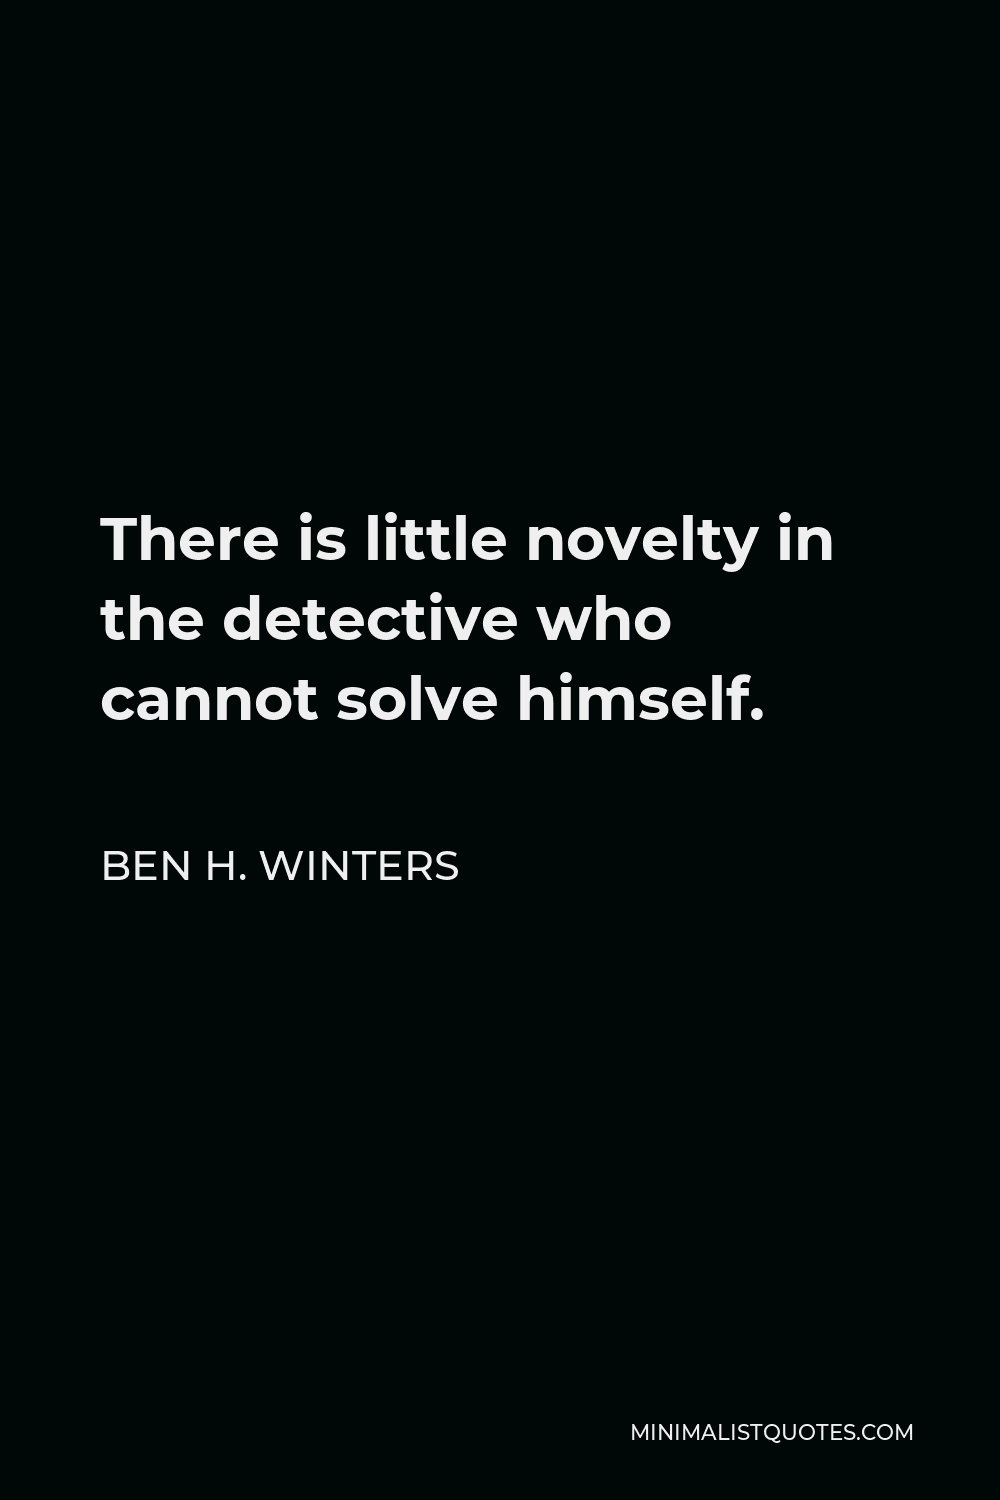 Ben H. Winters Quote - There is little novelty in the detective who cannot solve himself.